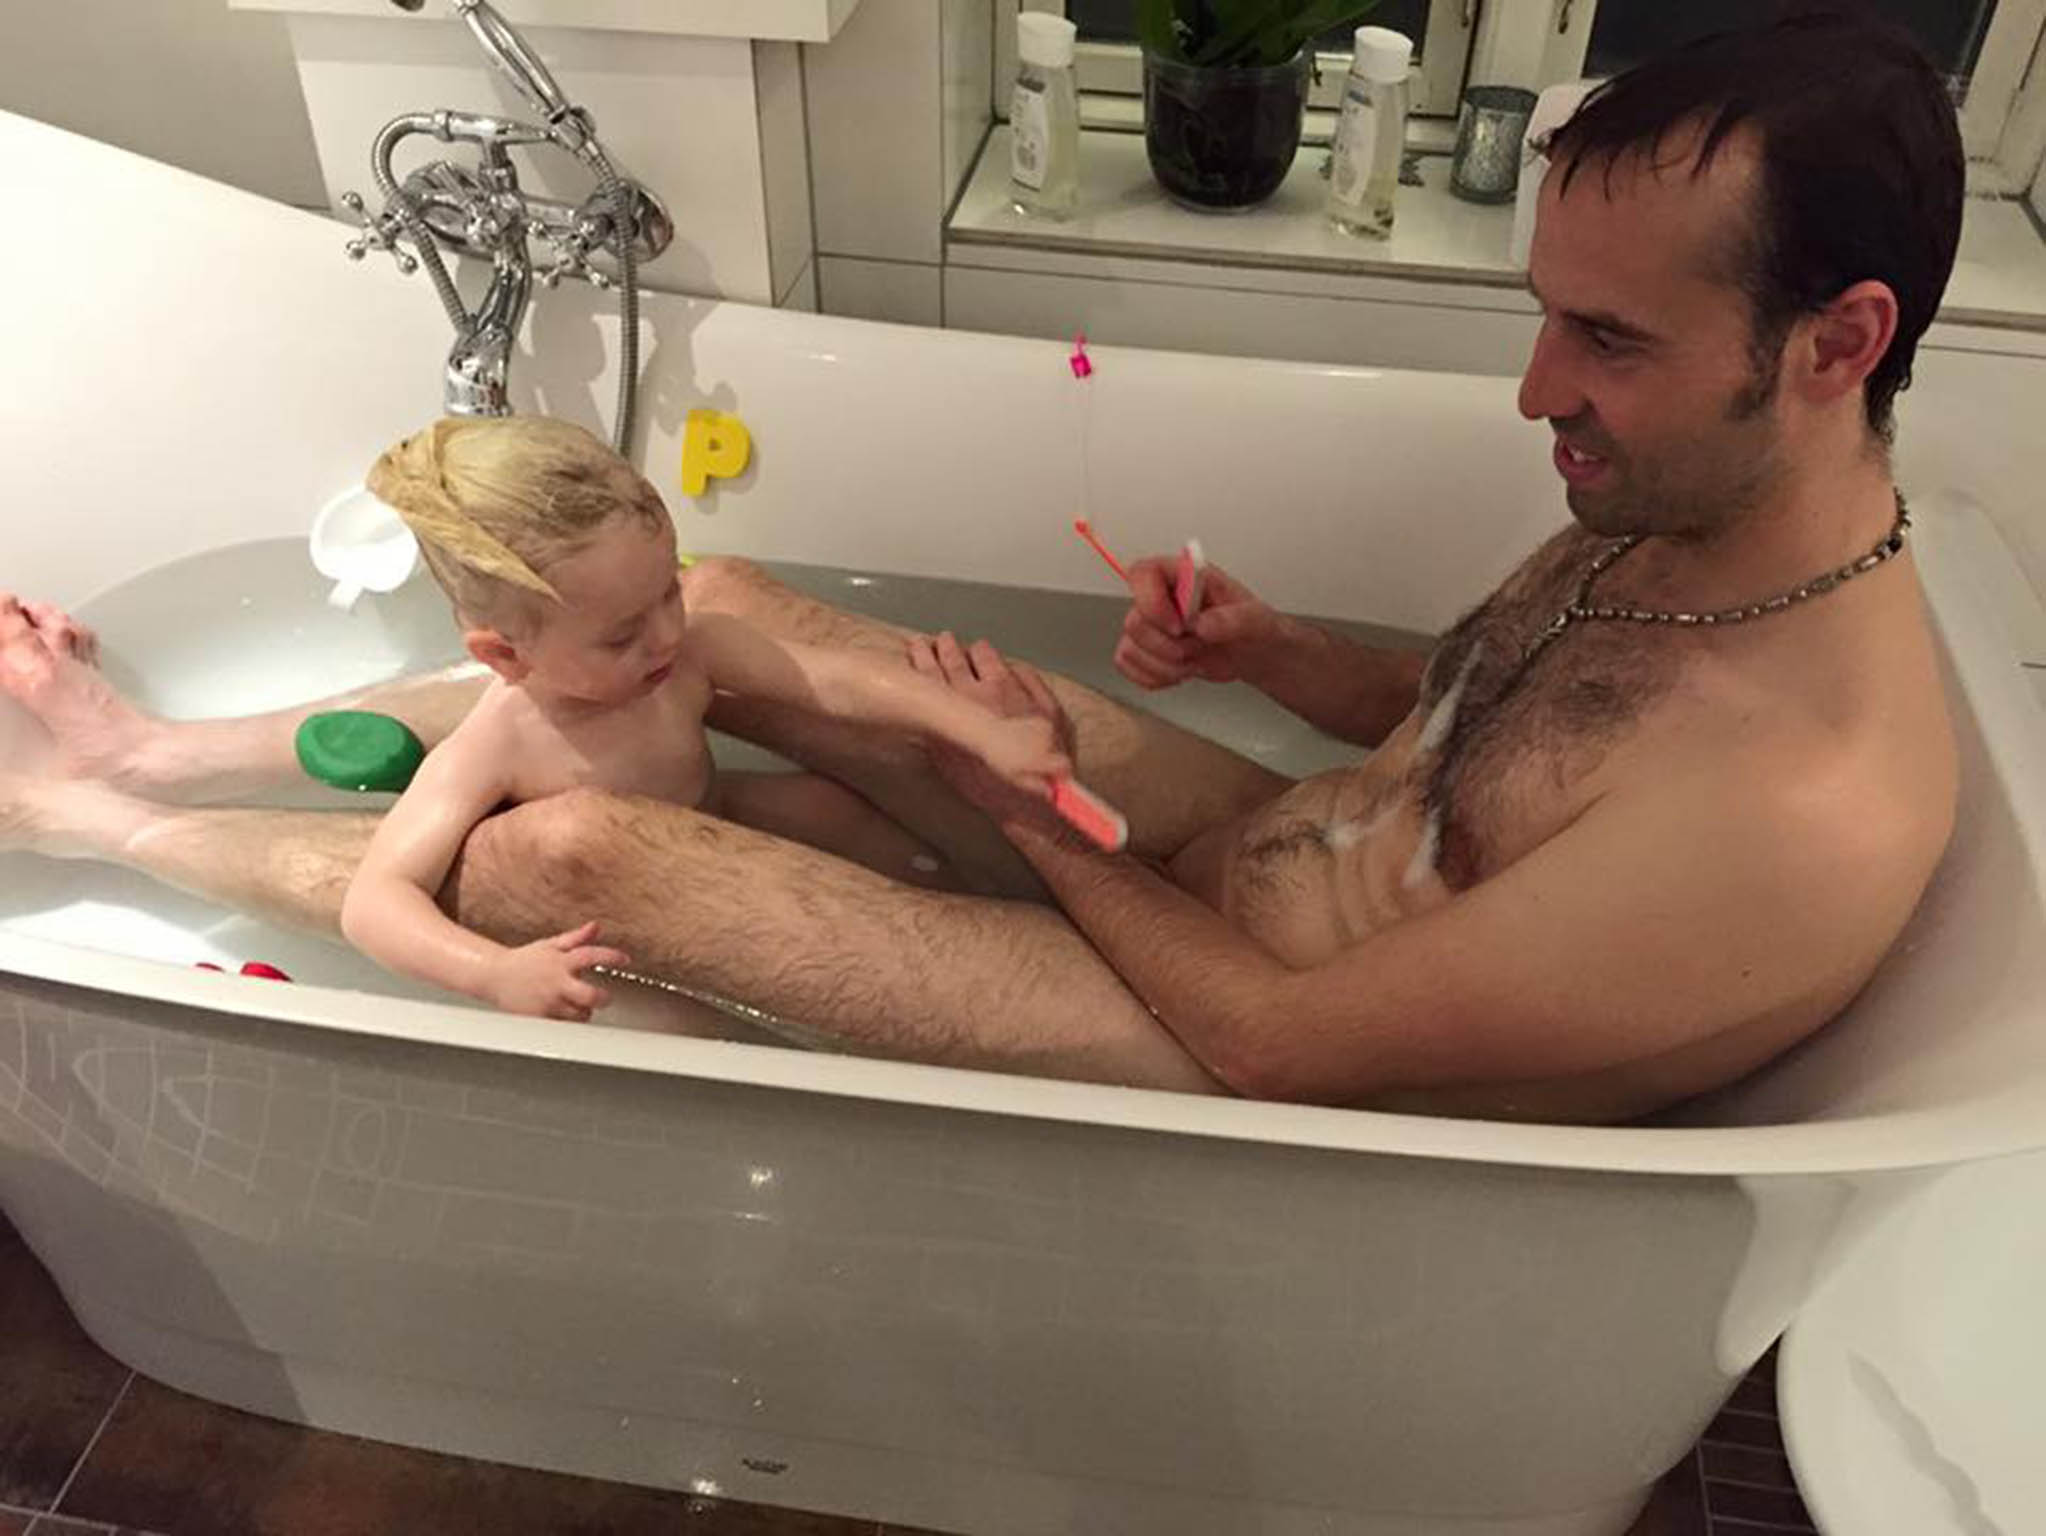 Torben Chris Danish comedian posts photo of himself taking a bath with his two-year-old daughter in face of paedophilia claims The Independent The Independent